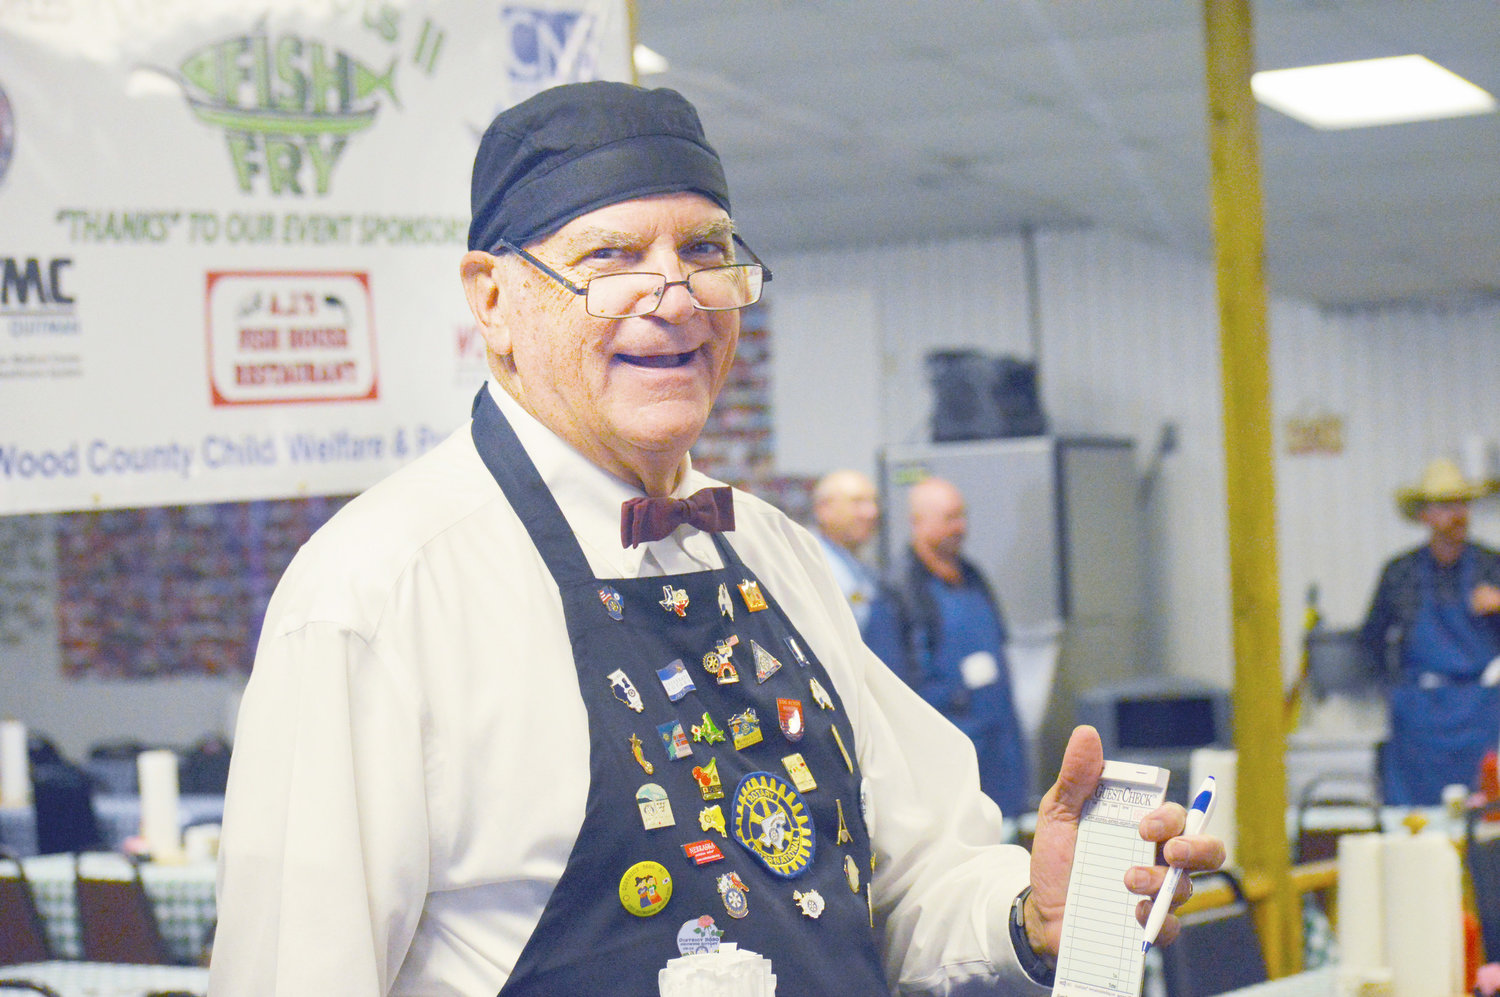 Retired Methodist Minister Bill Hedges was one of the waiters at Tips for Tots,
a fundraiser for Wood County foster children held at AJ’s Fish House at Lake Fork. In addition to waiter tips, funds were raised through sponsors, a live auction, raffle and bake sale. (Photo by Larry Tucker)